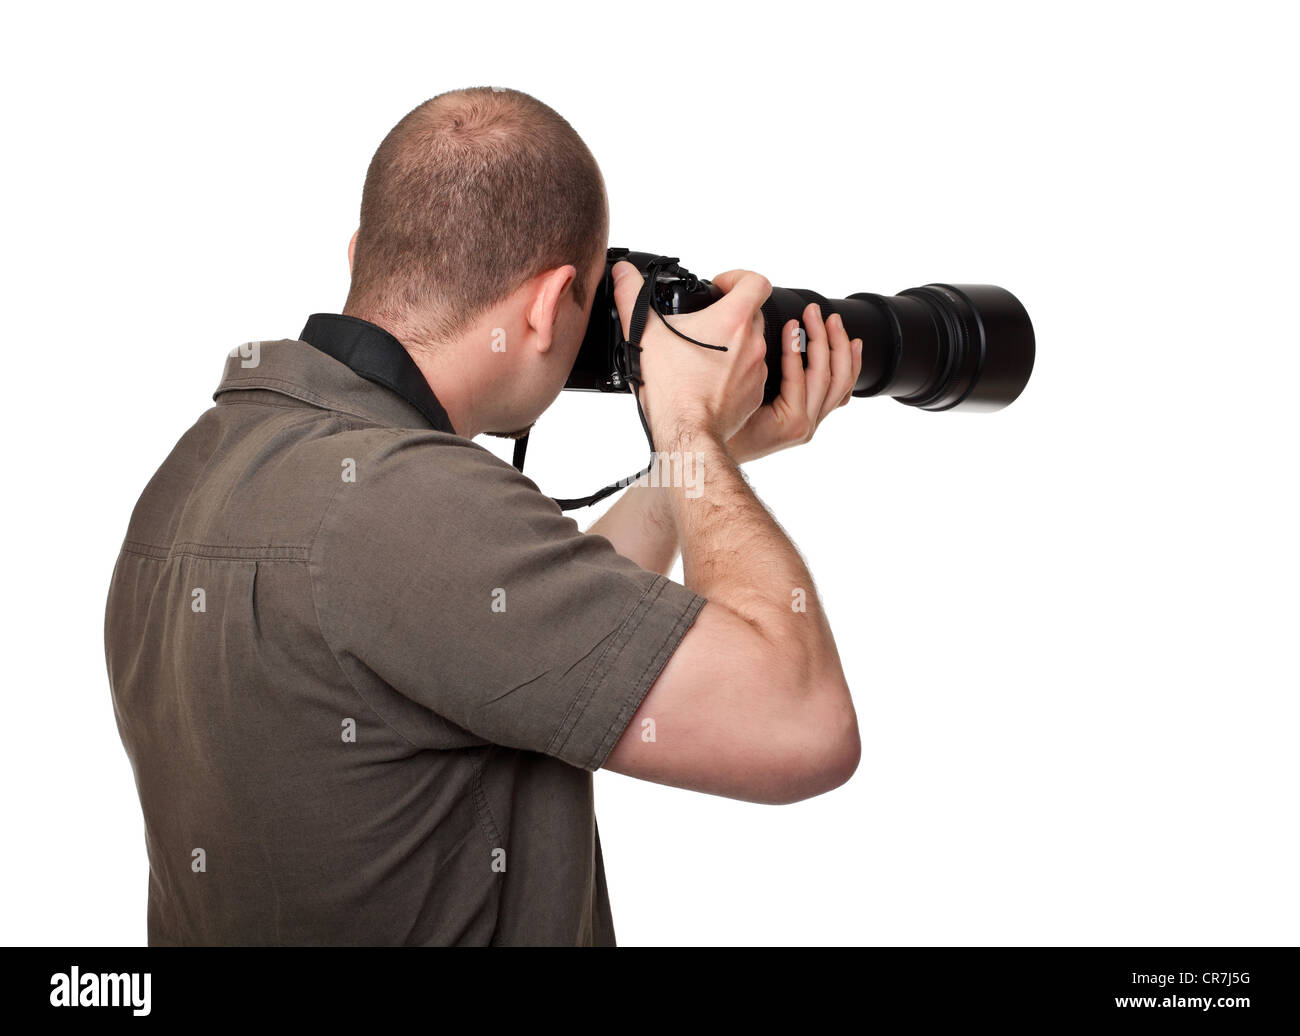 man with camera and huge lens Stock Photo